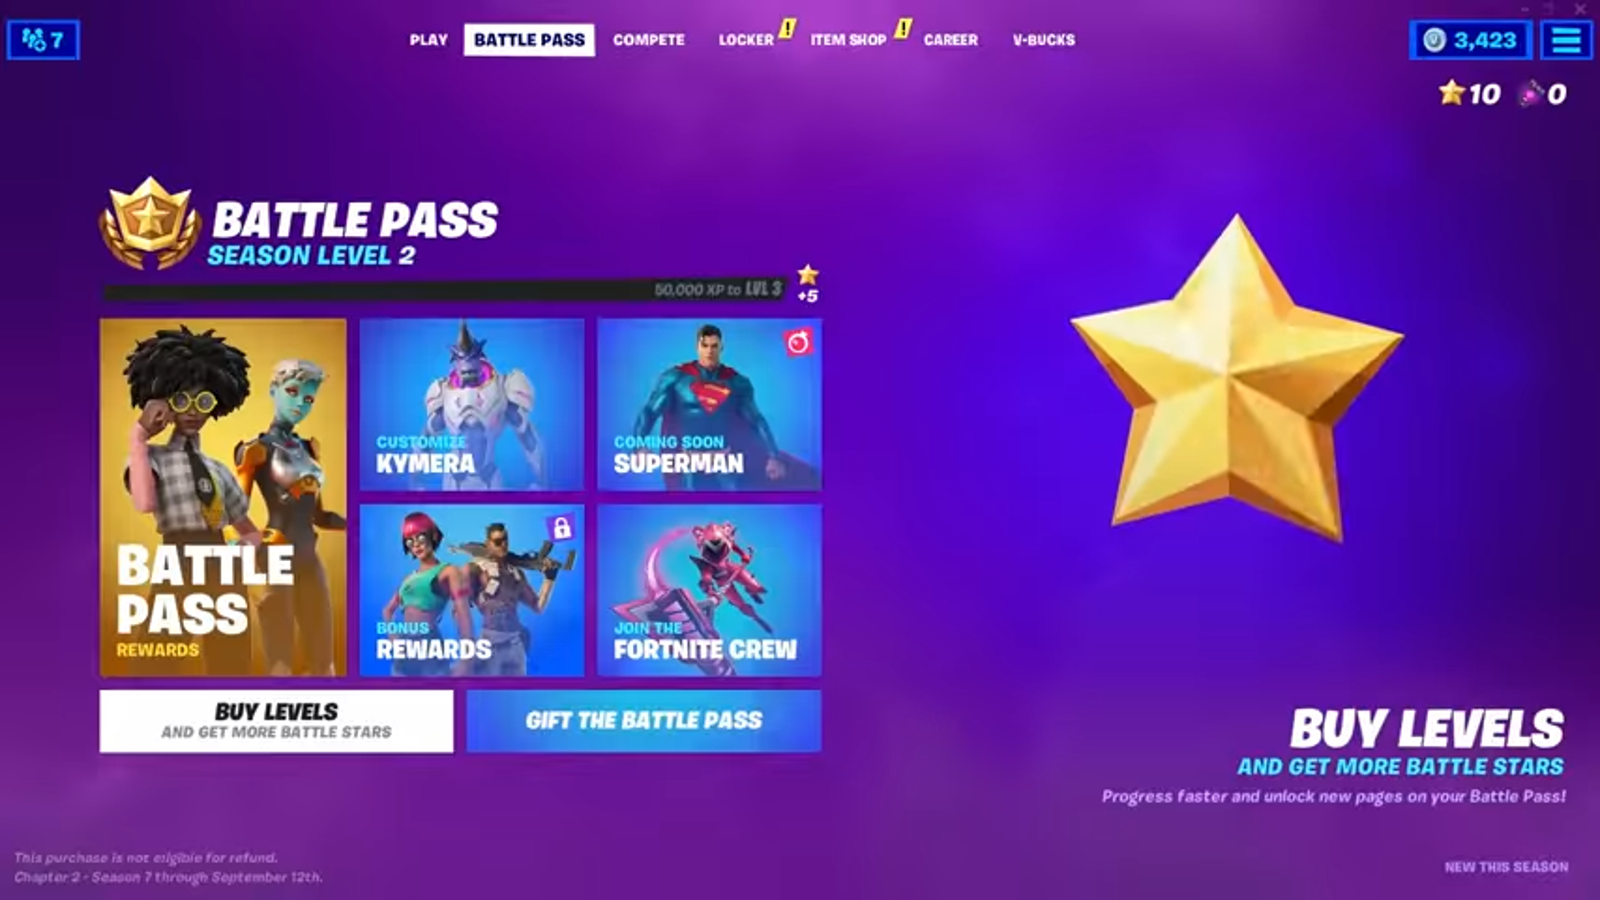 Fortnite: How to log out of Battle Royale on PS4 in Chapter 2 - Daily Star